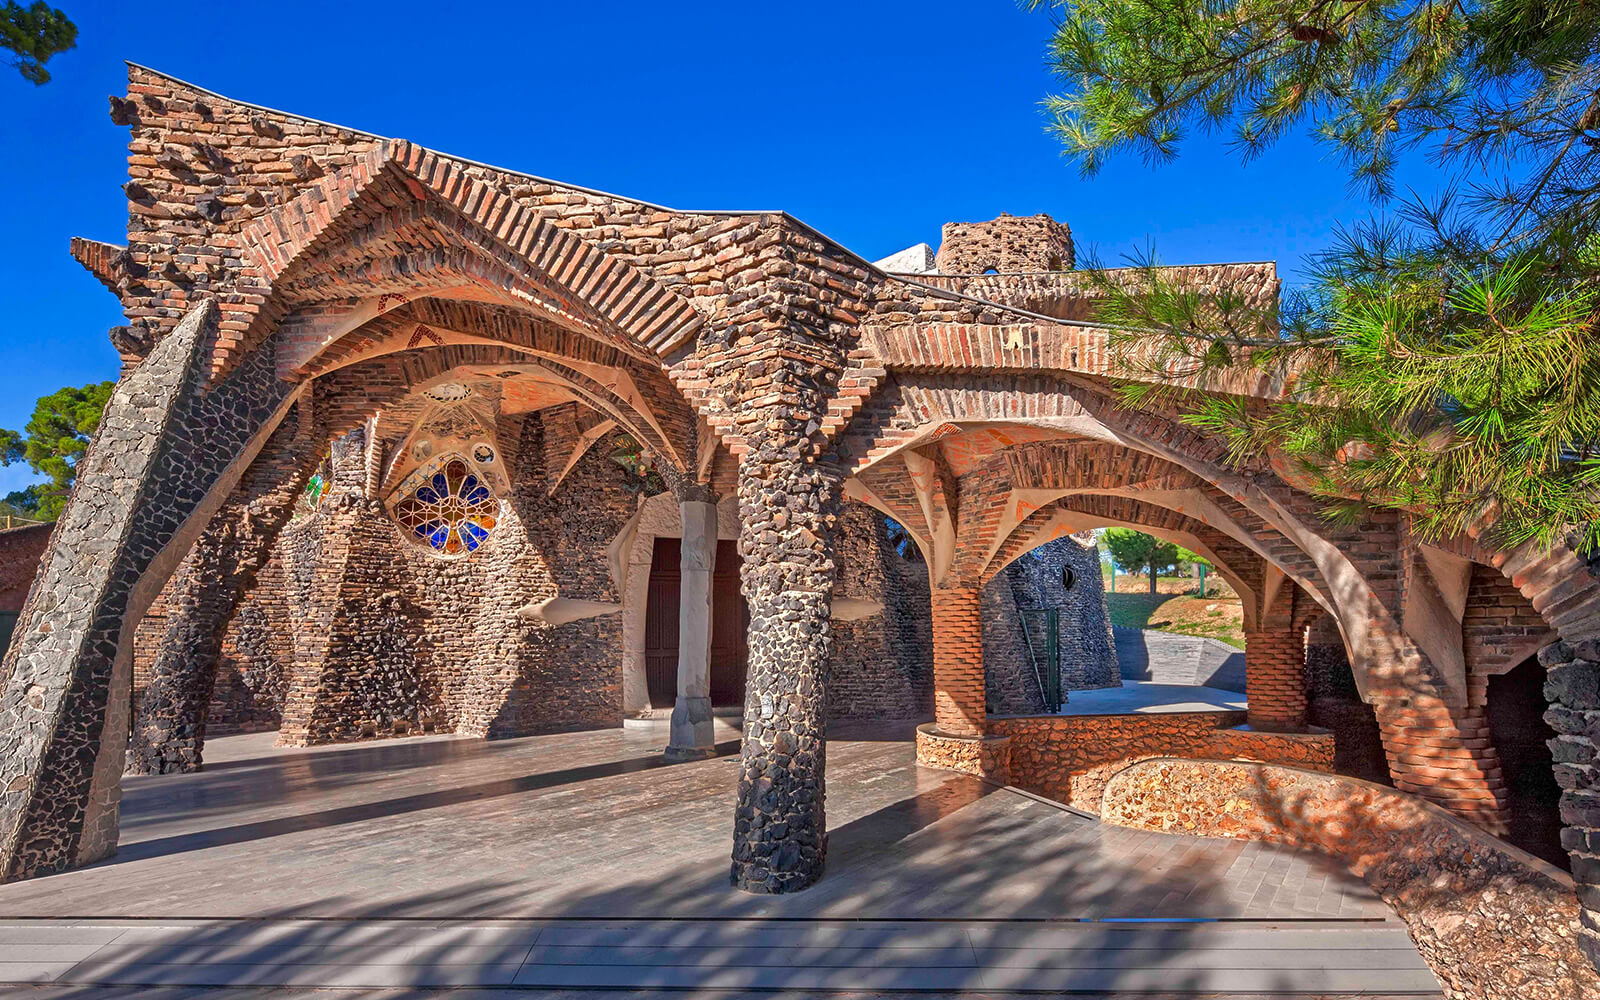 Image of Colonia Guell Tickets With Transportation to/from Barcelona